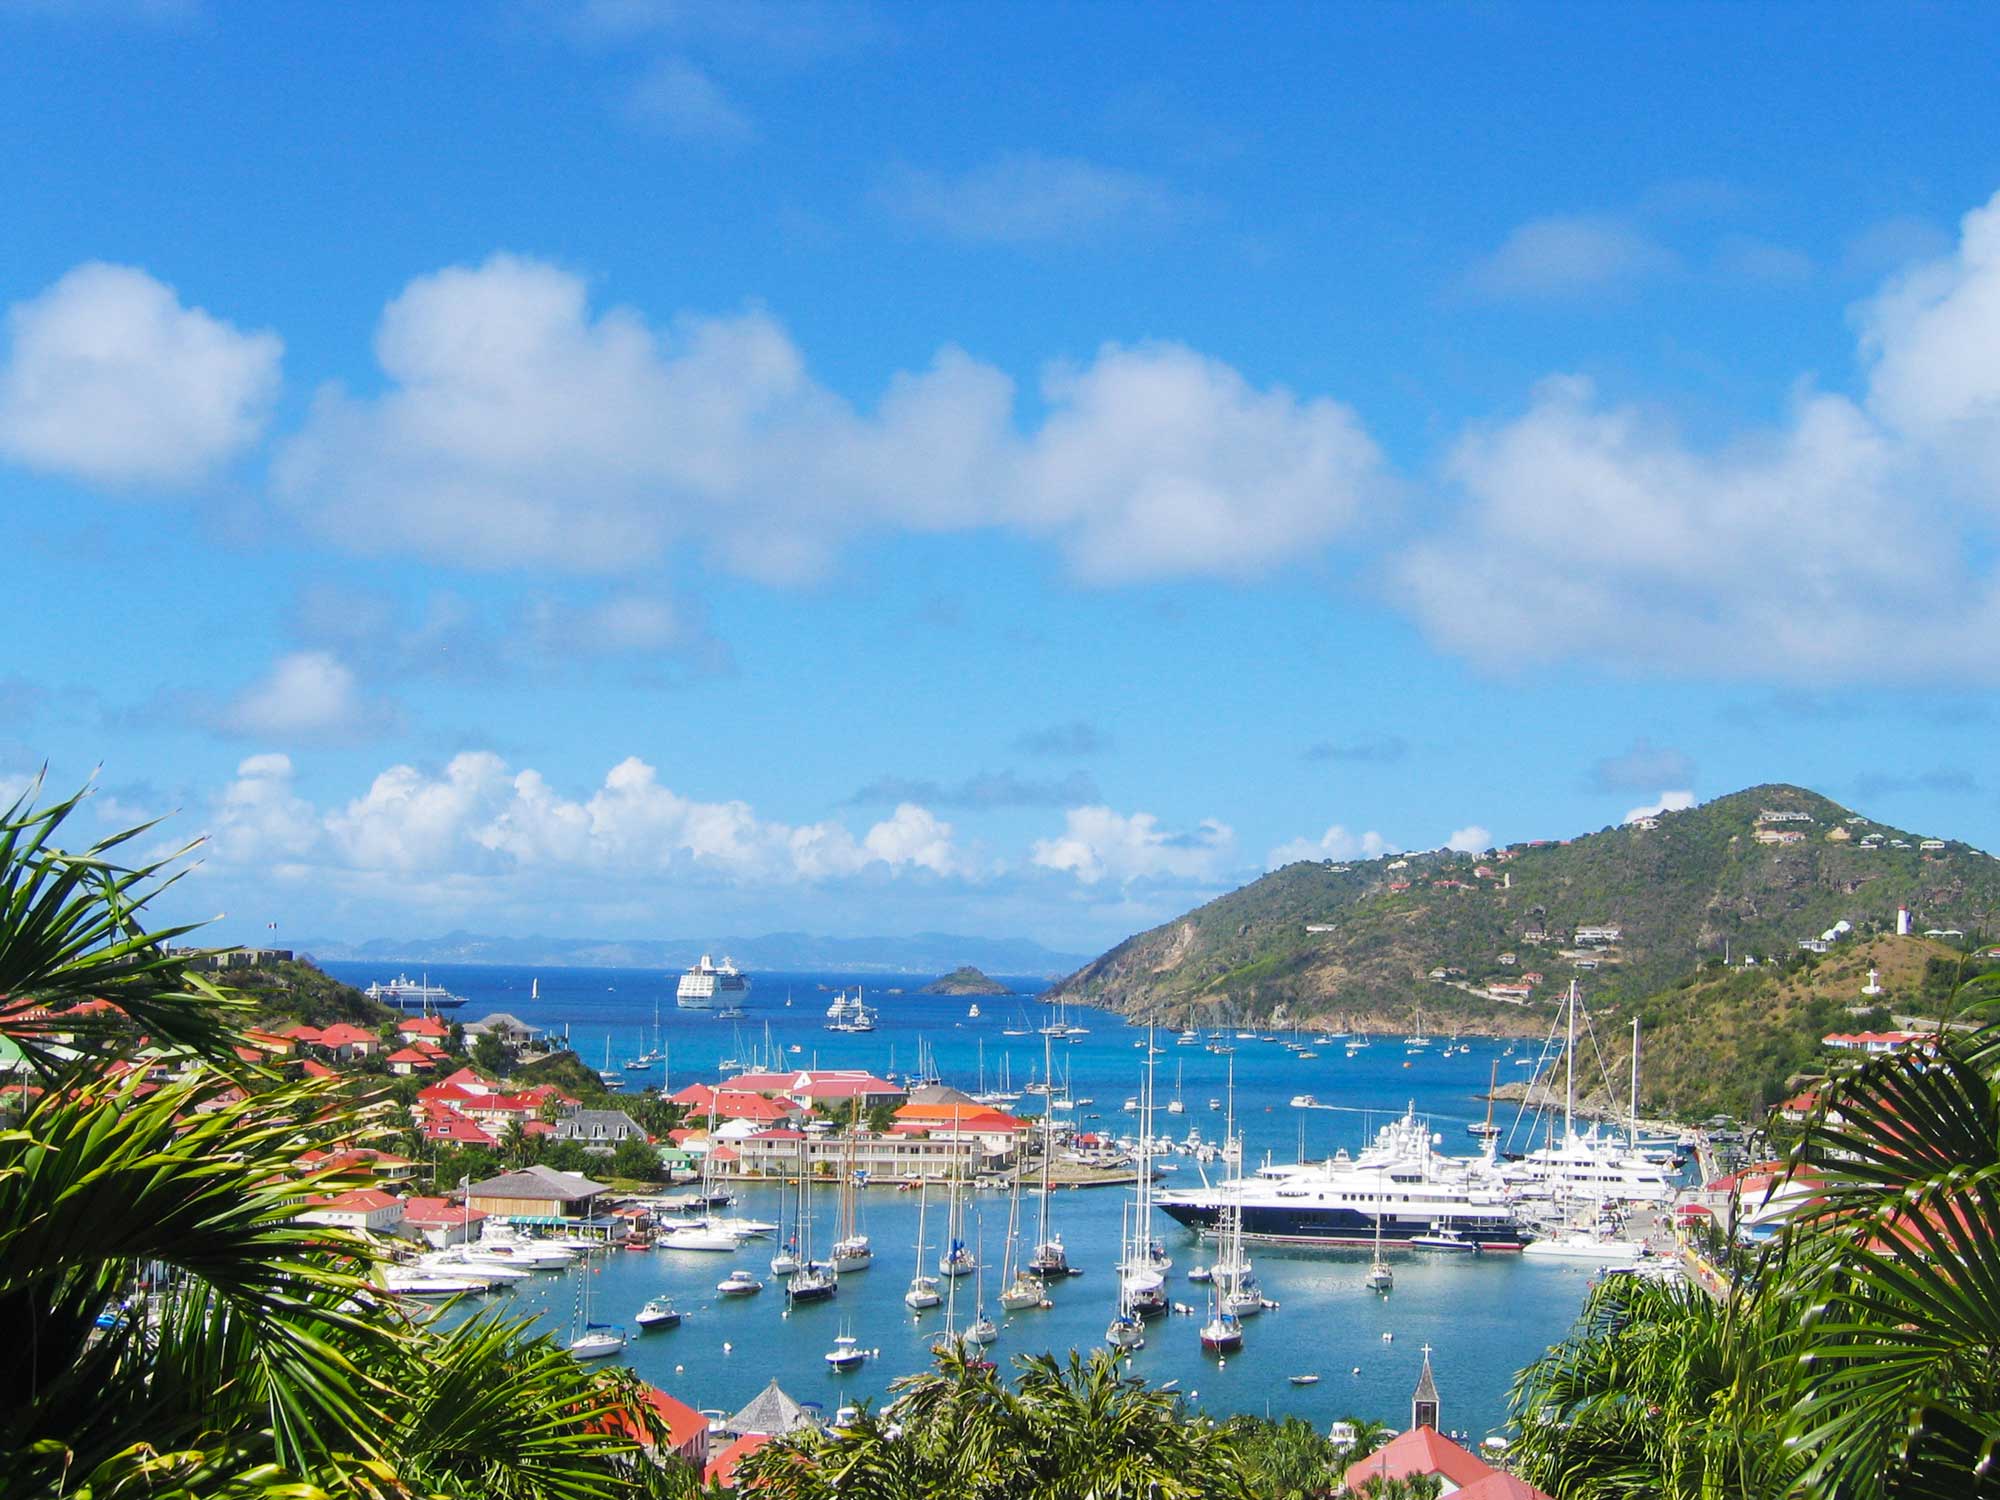 Affordable Honeymoon Packages | Luxury Honeymoon Deals | Best Places to Honeymoon | St. Barthelemy